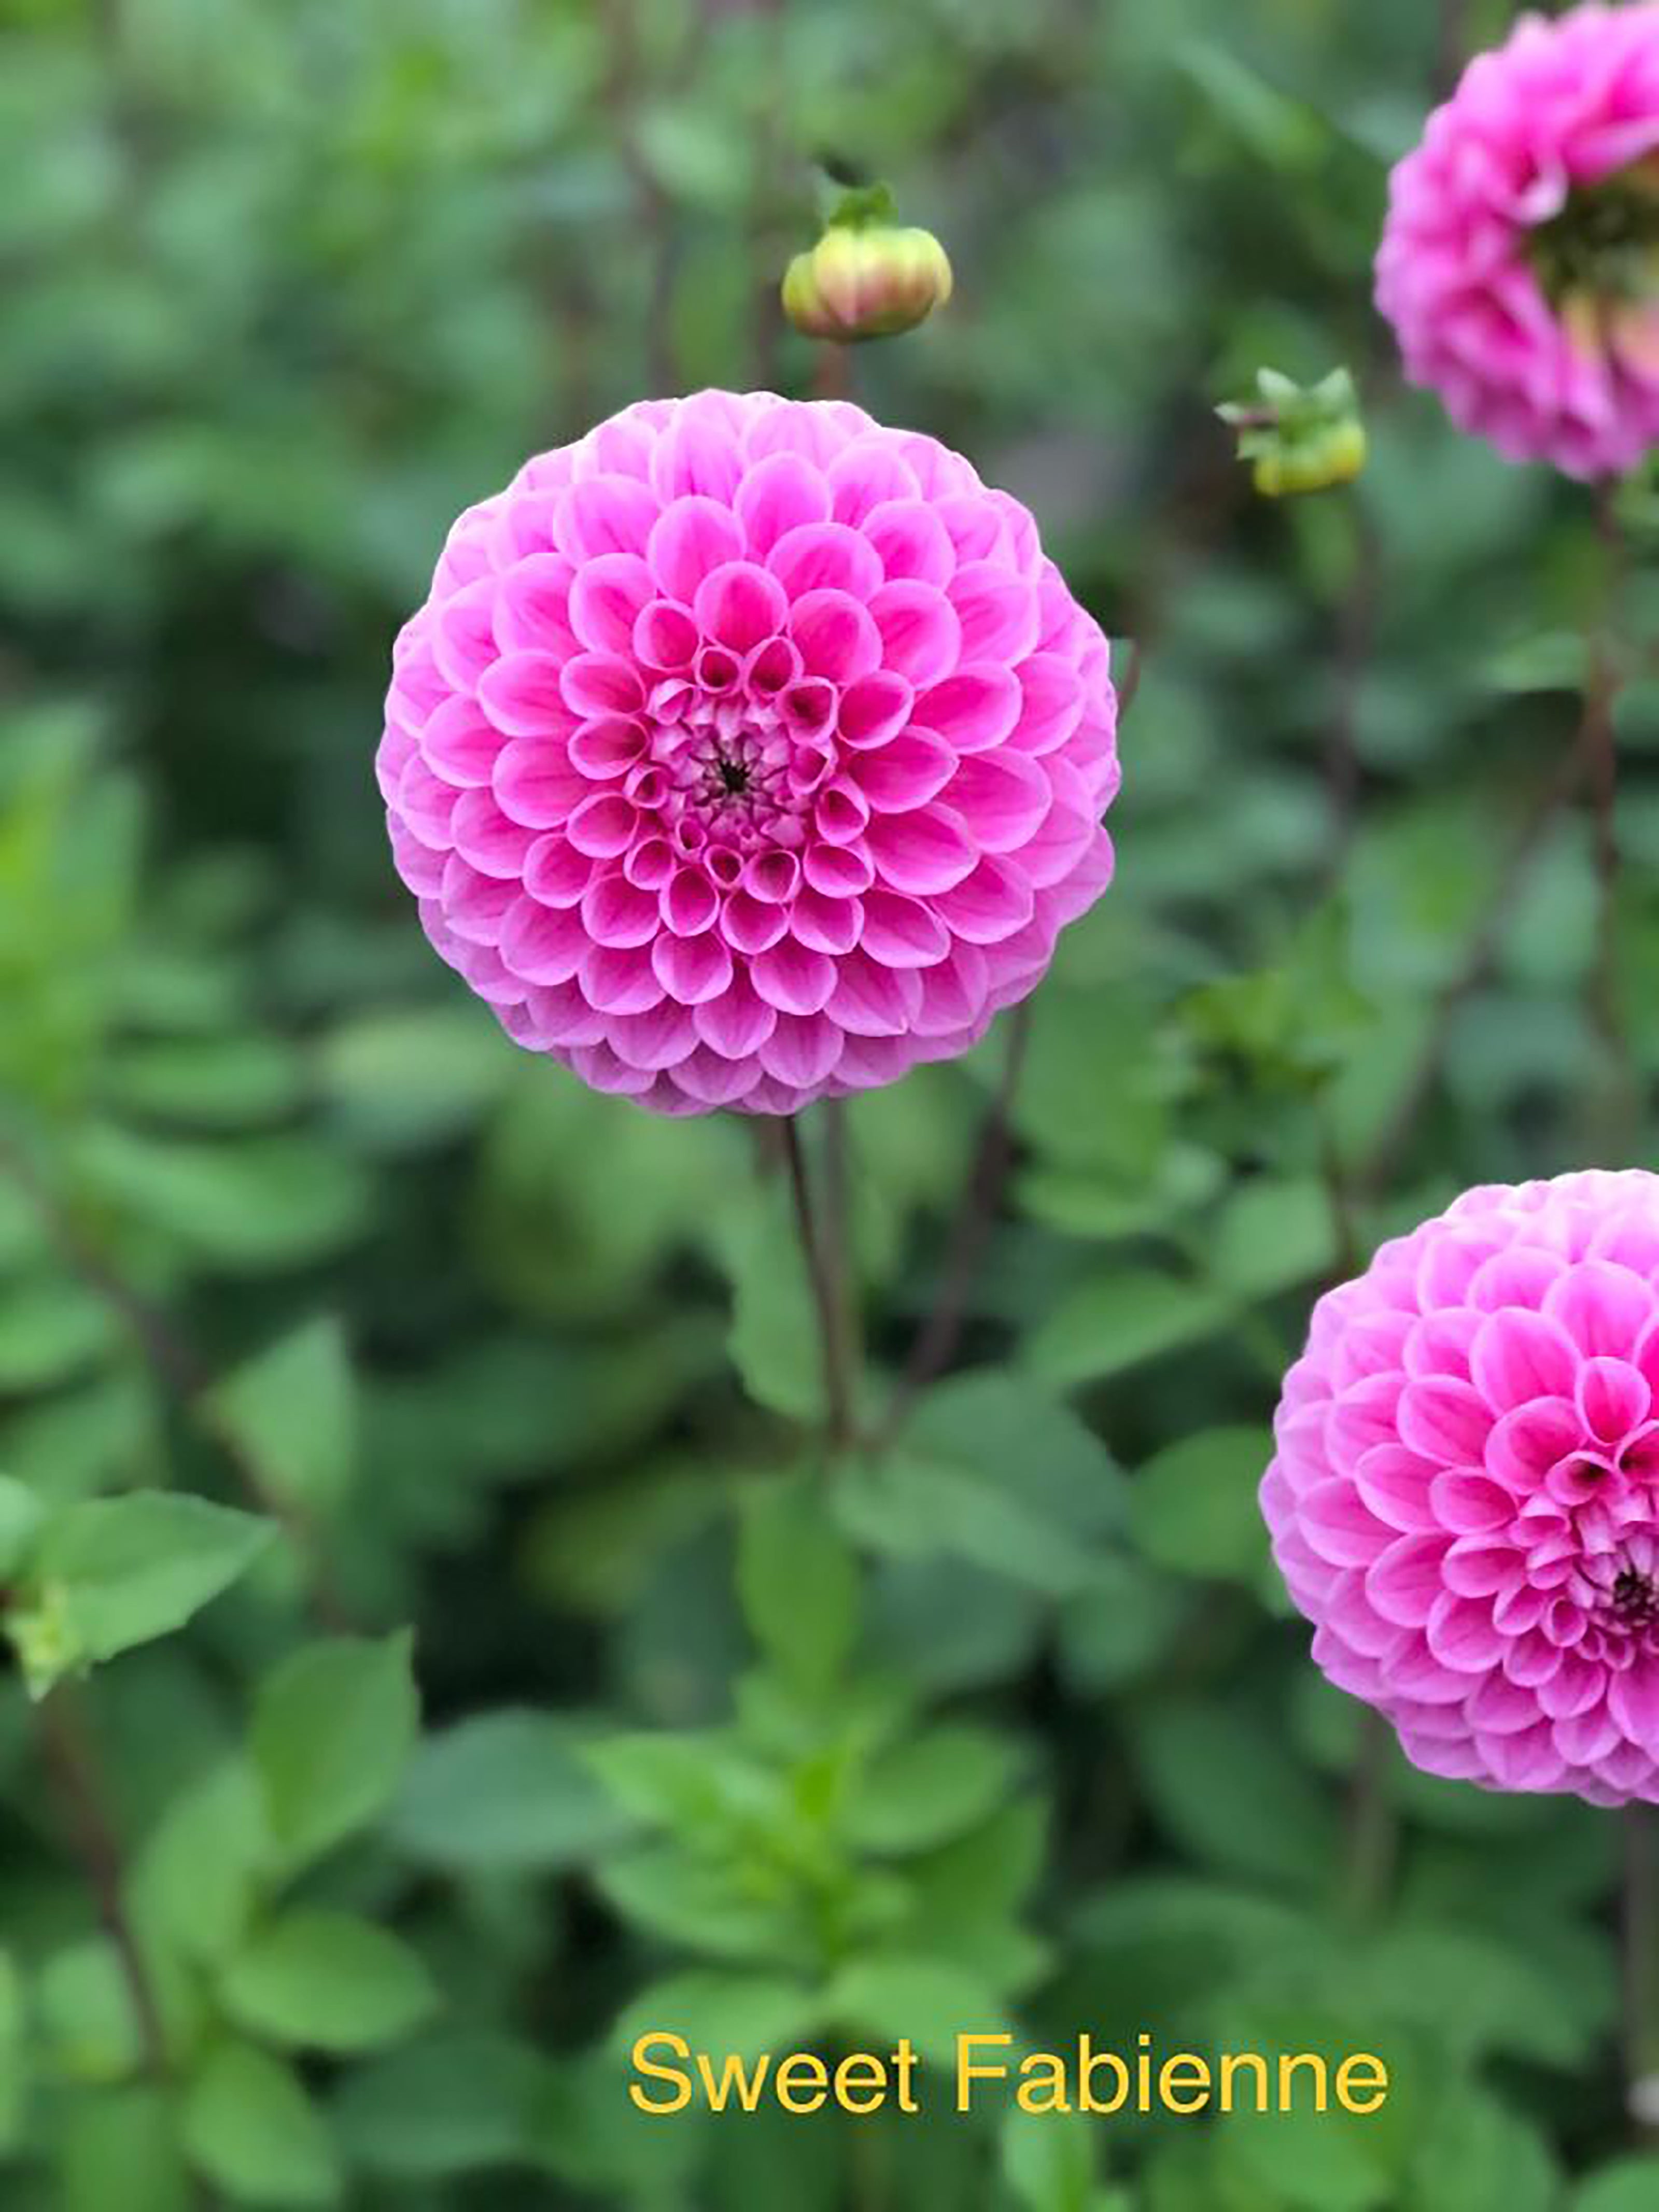 Dahlia 'Sweet Fabienne' ball flowered - 2, 3 or 5 tubers - Free delivery within the UK